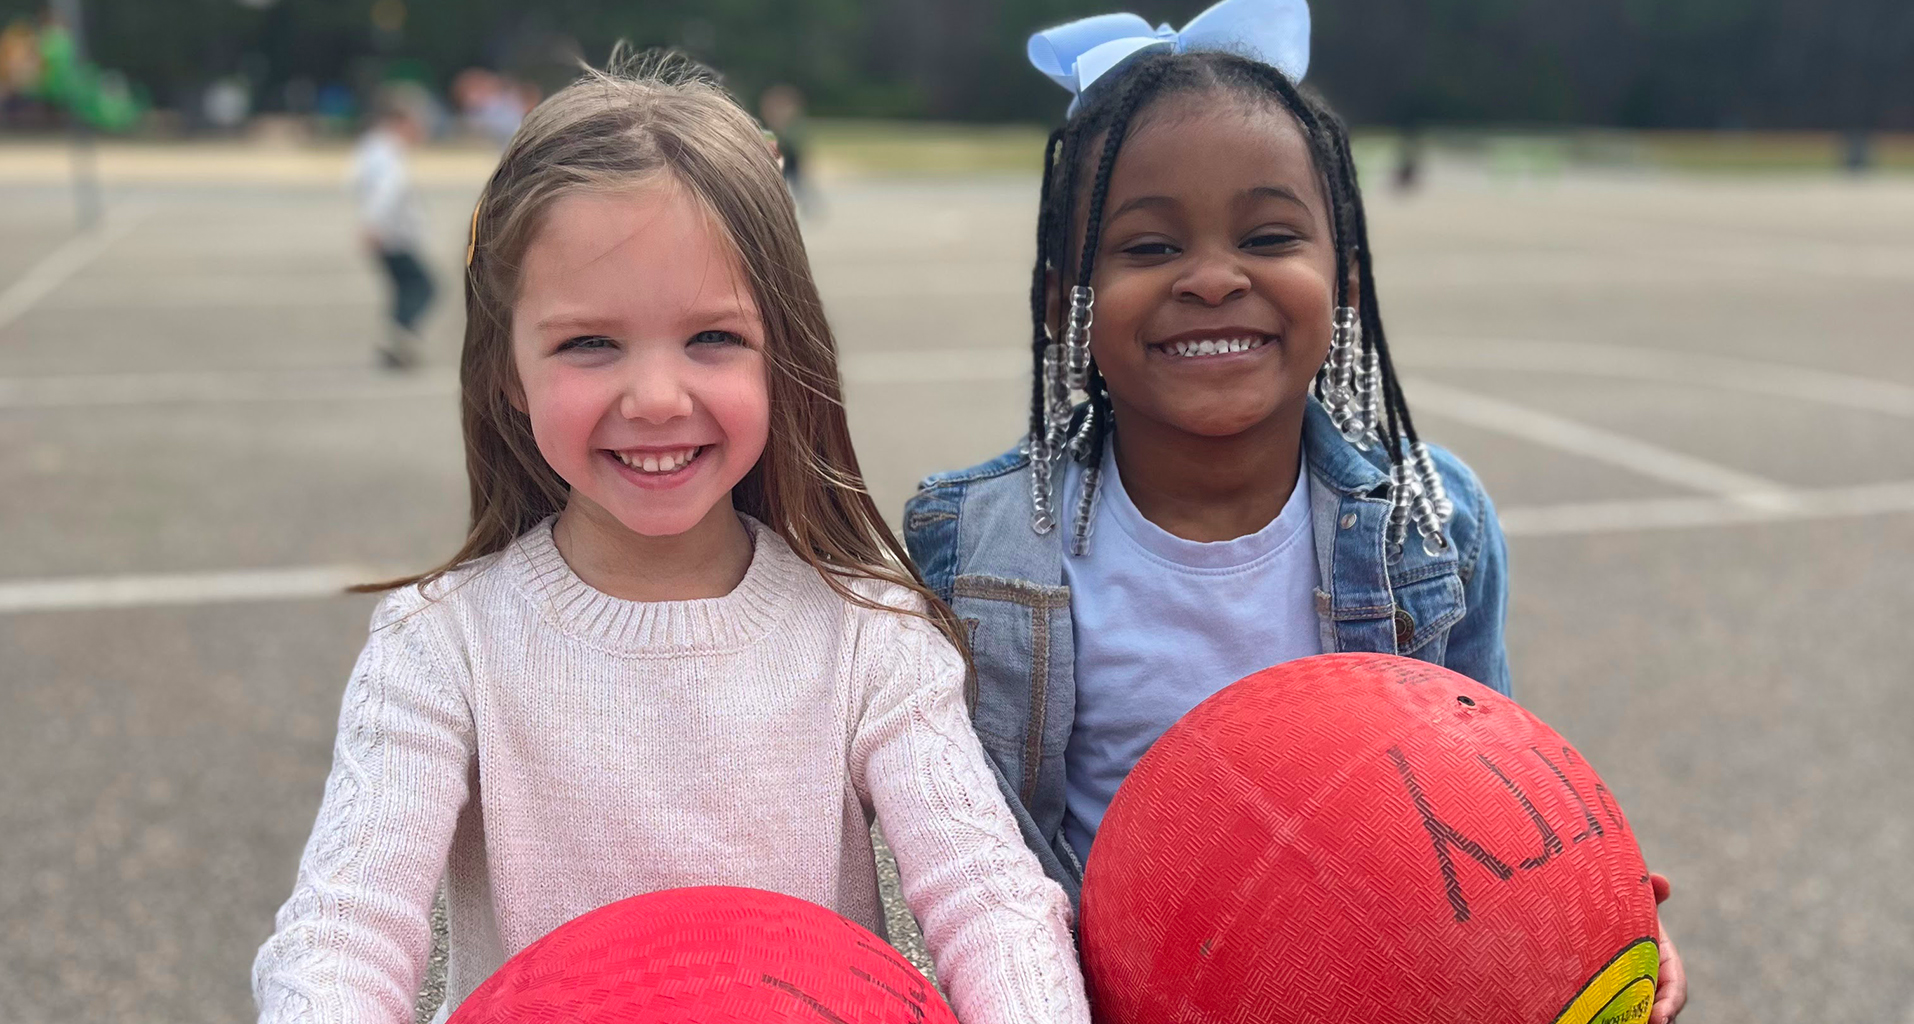 Two females on the playground holding big red balls smile for the camera.